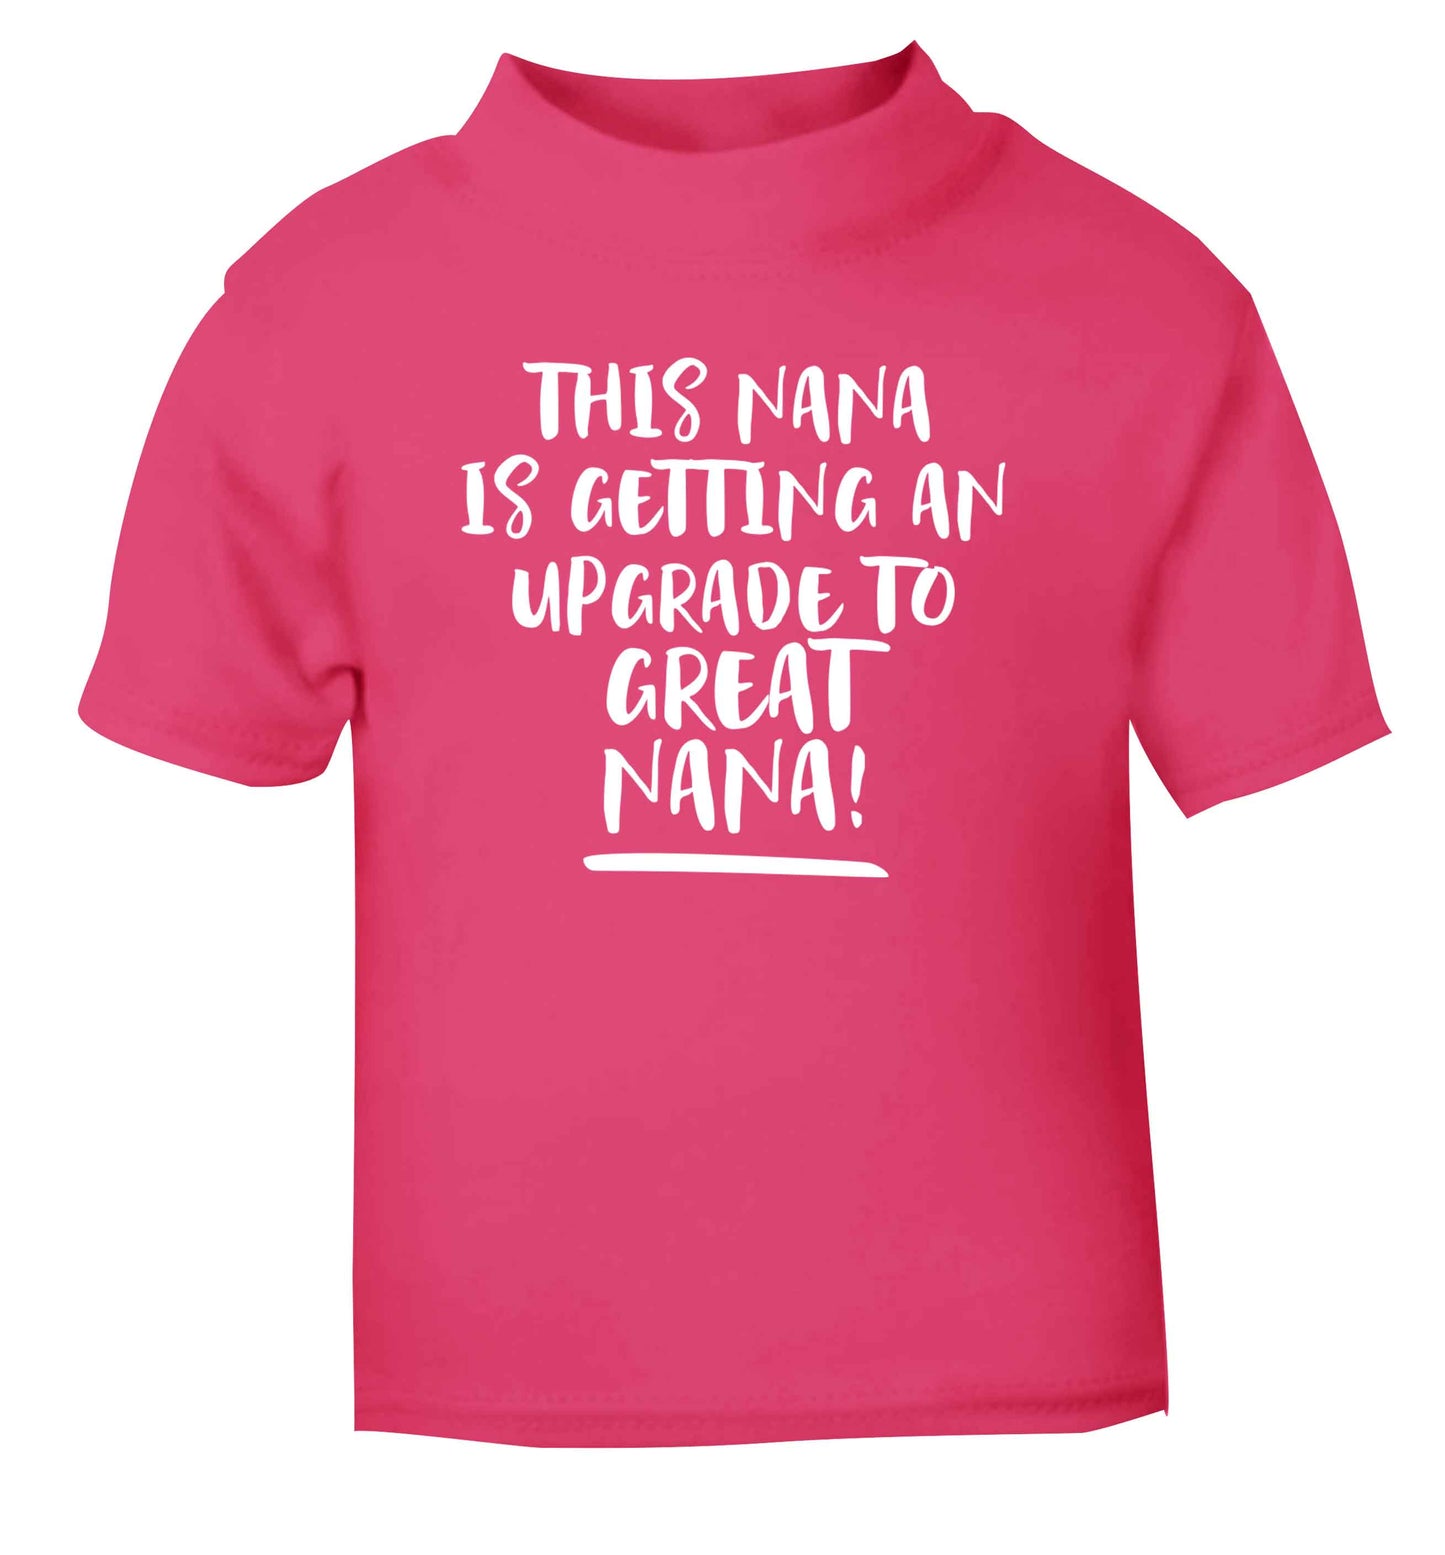 This nana is getting an upgrade to great nana! pink Baby Toddler Tshirt 2 Years